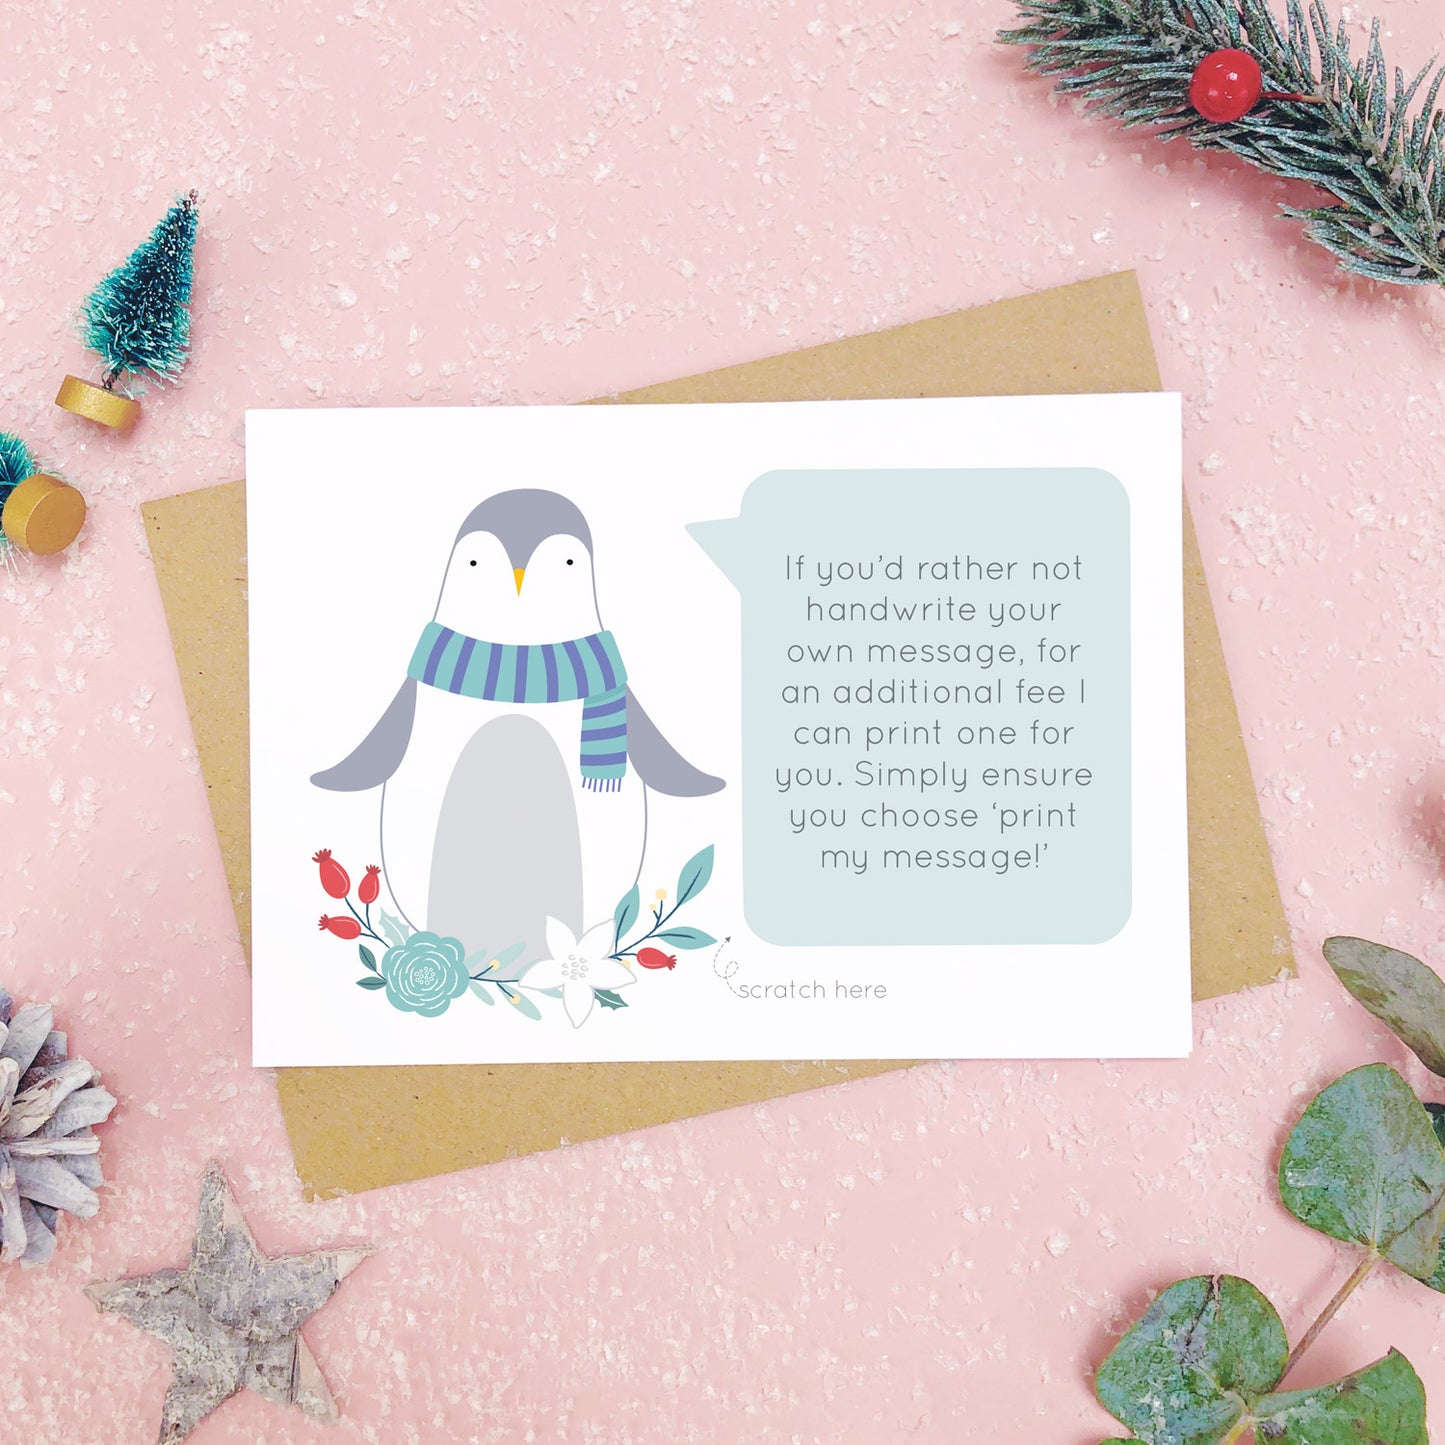 Penguin scratch card showing where you write your hidden message can be printed. Shot on a pink background, surrounded with festive christmas props in tones of green and grey.